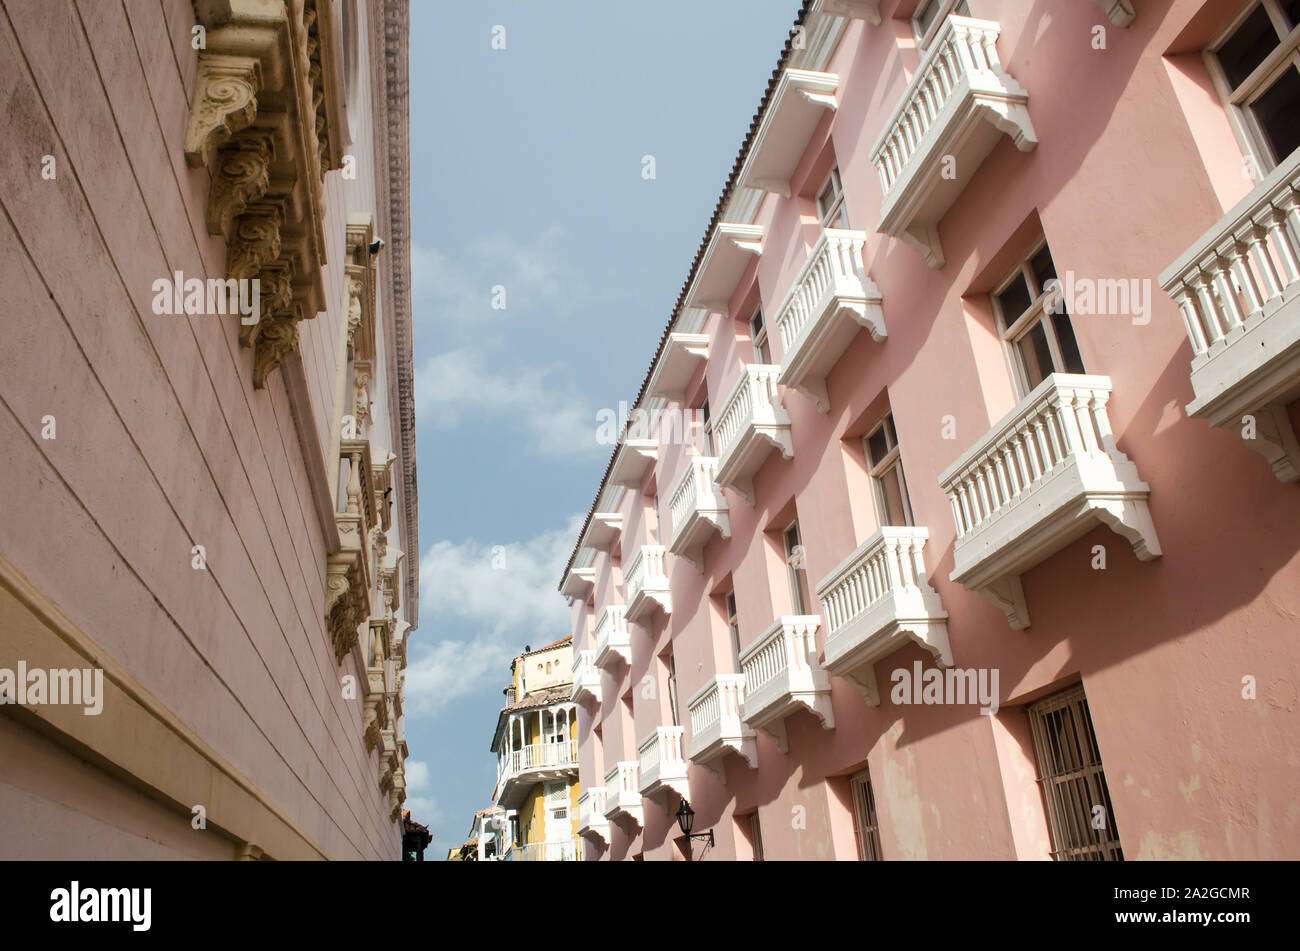 Colonial architecture in the Walled City Stock Photo